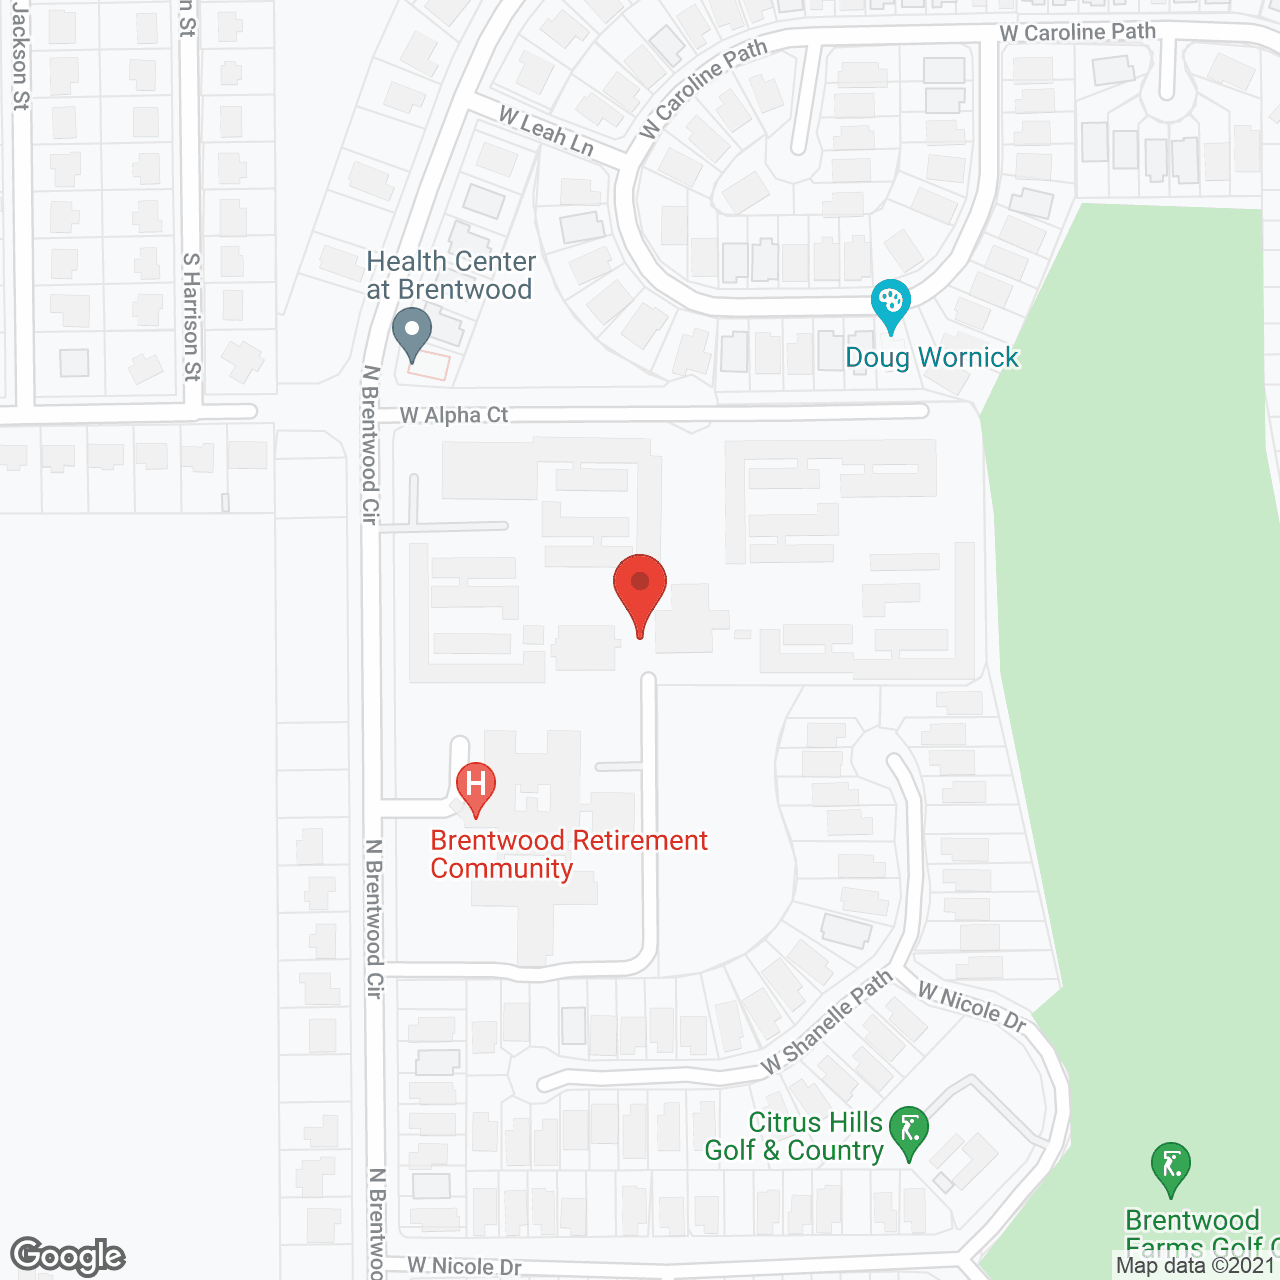 Brentwood Retirement Community in google map